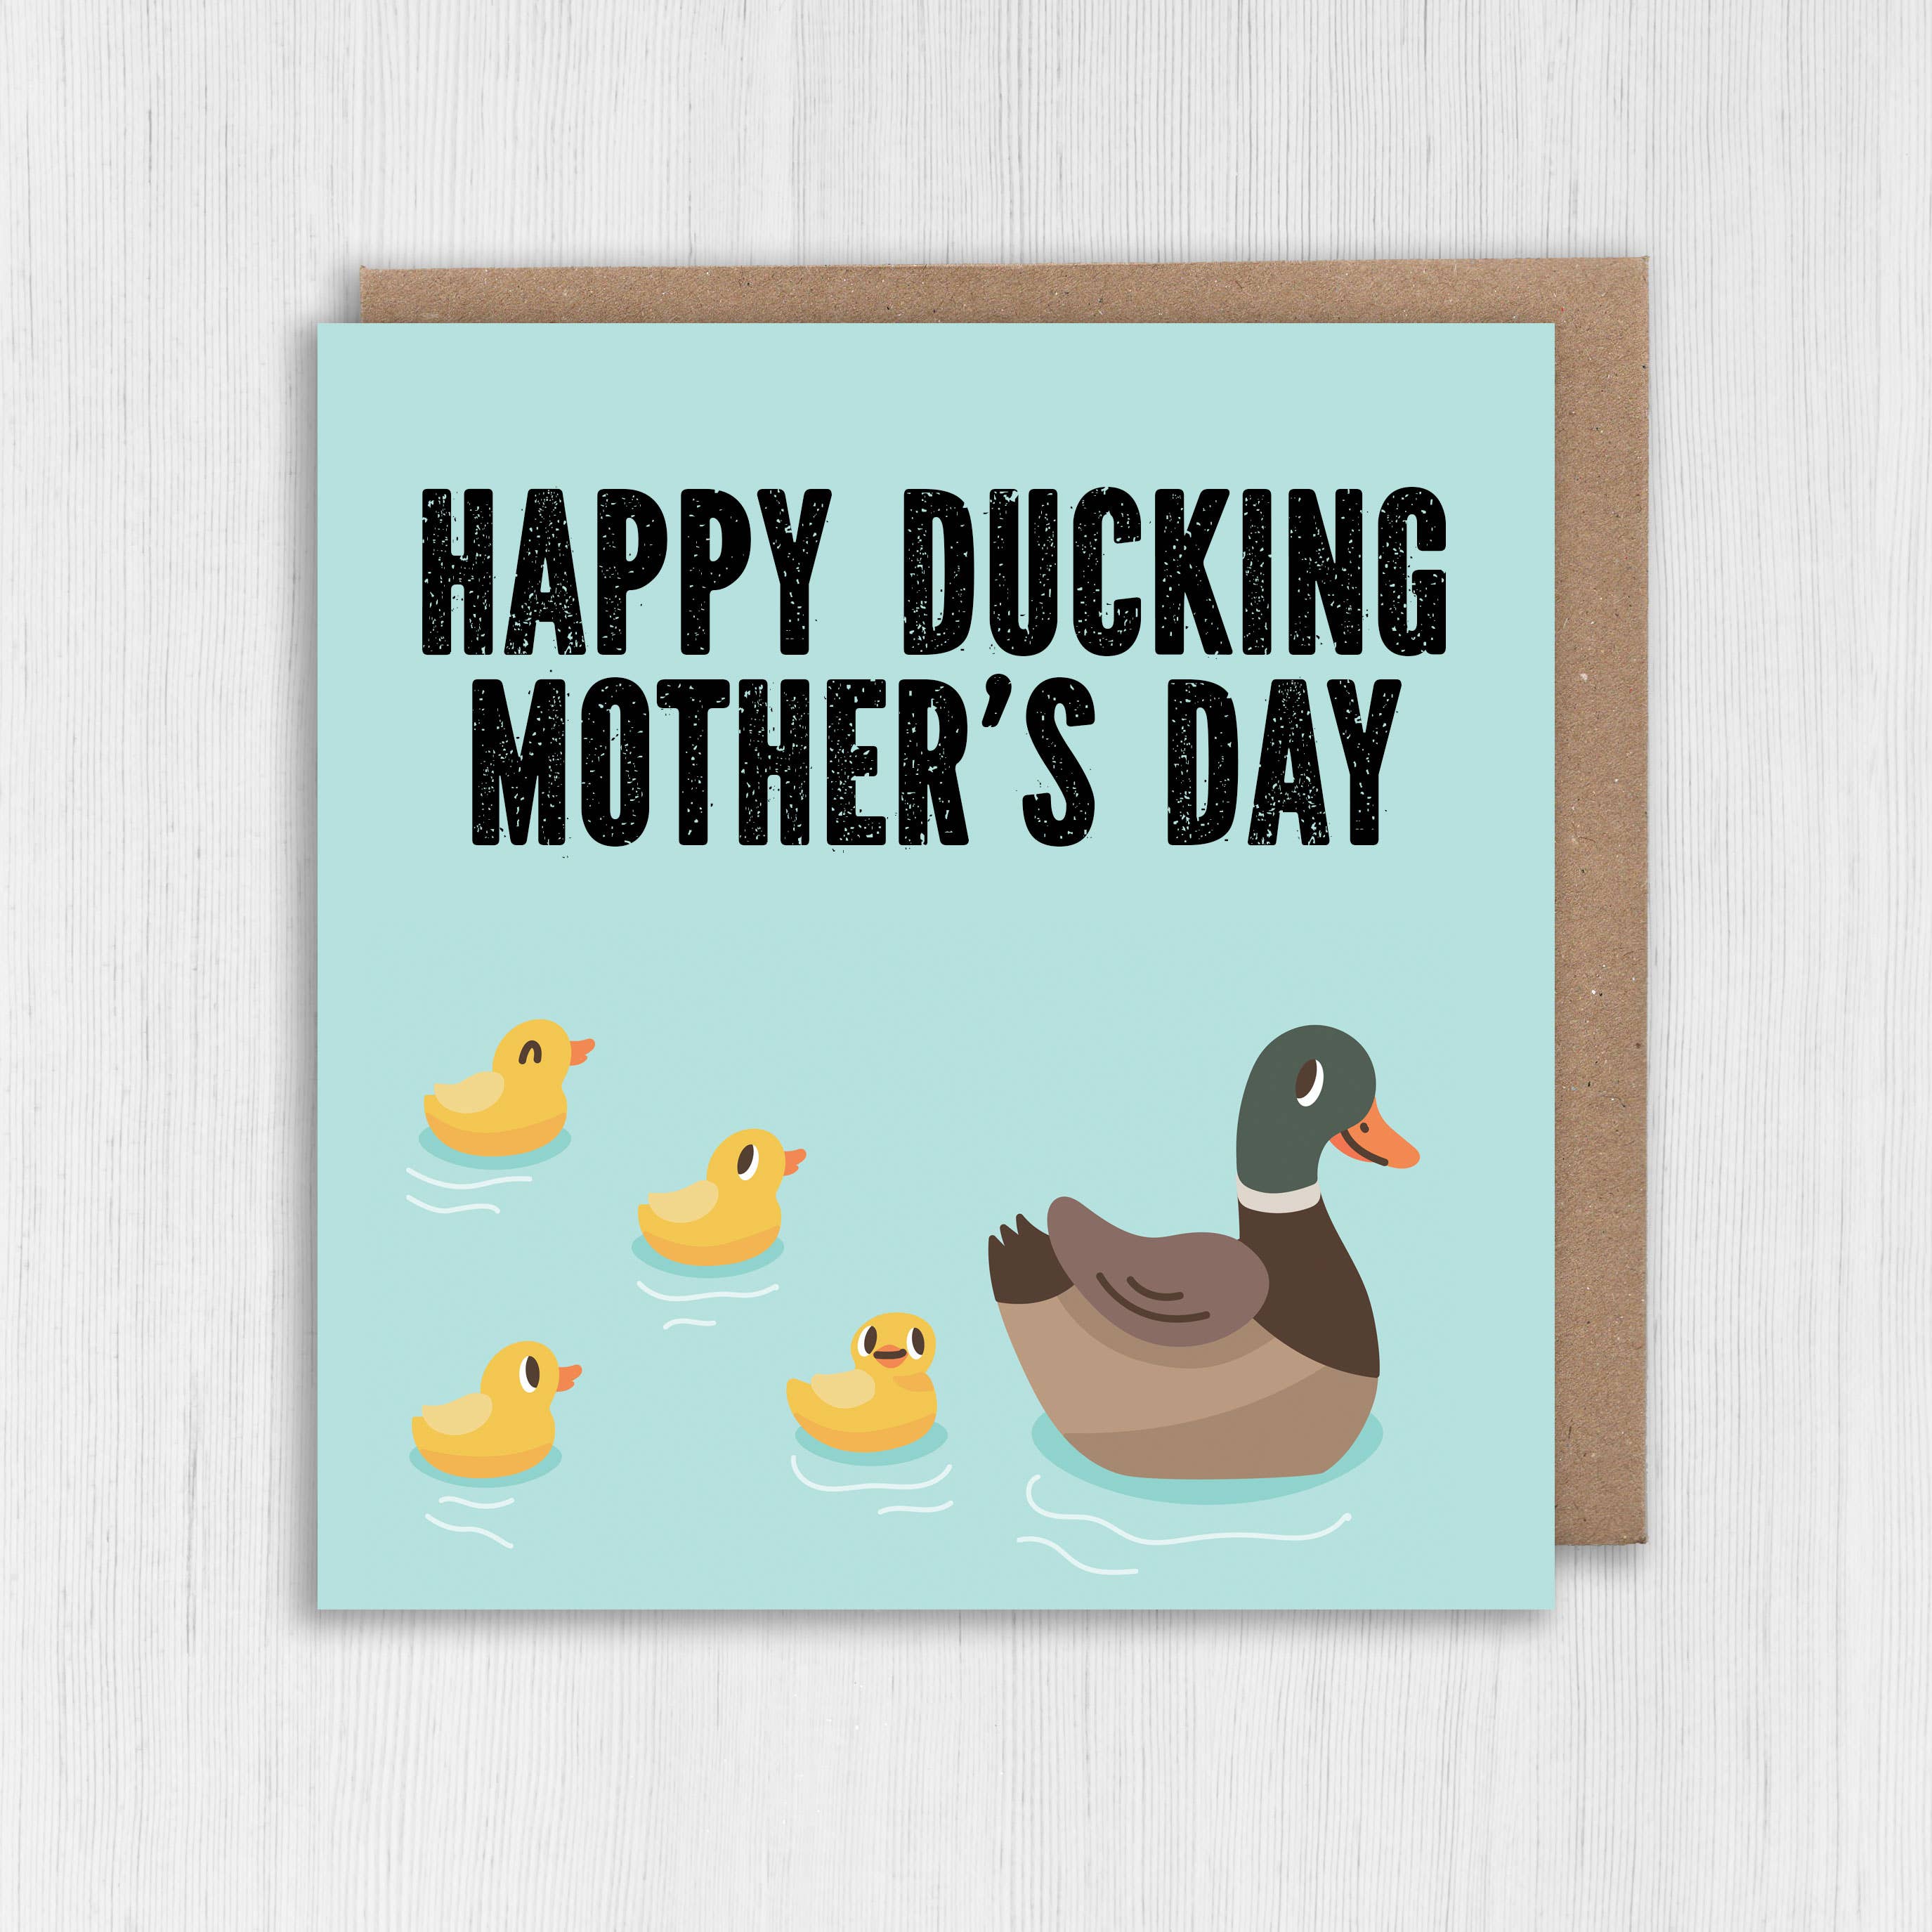 You Are A Duck-ing Cool Mom Mother's Day Card